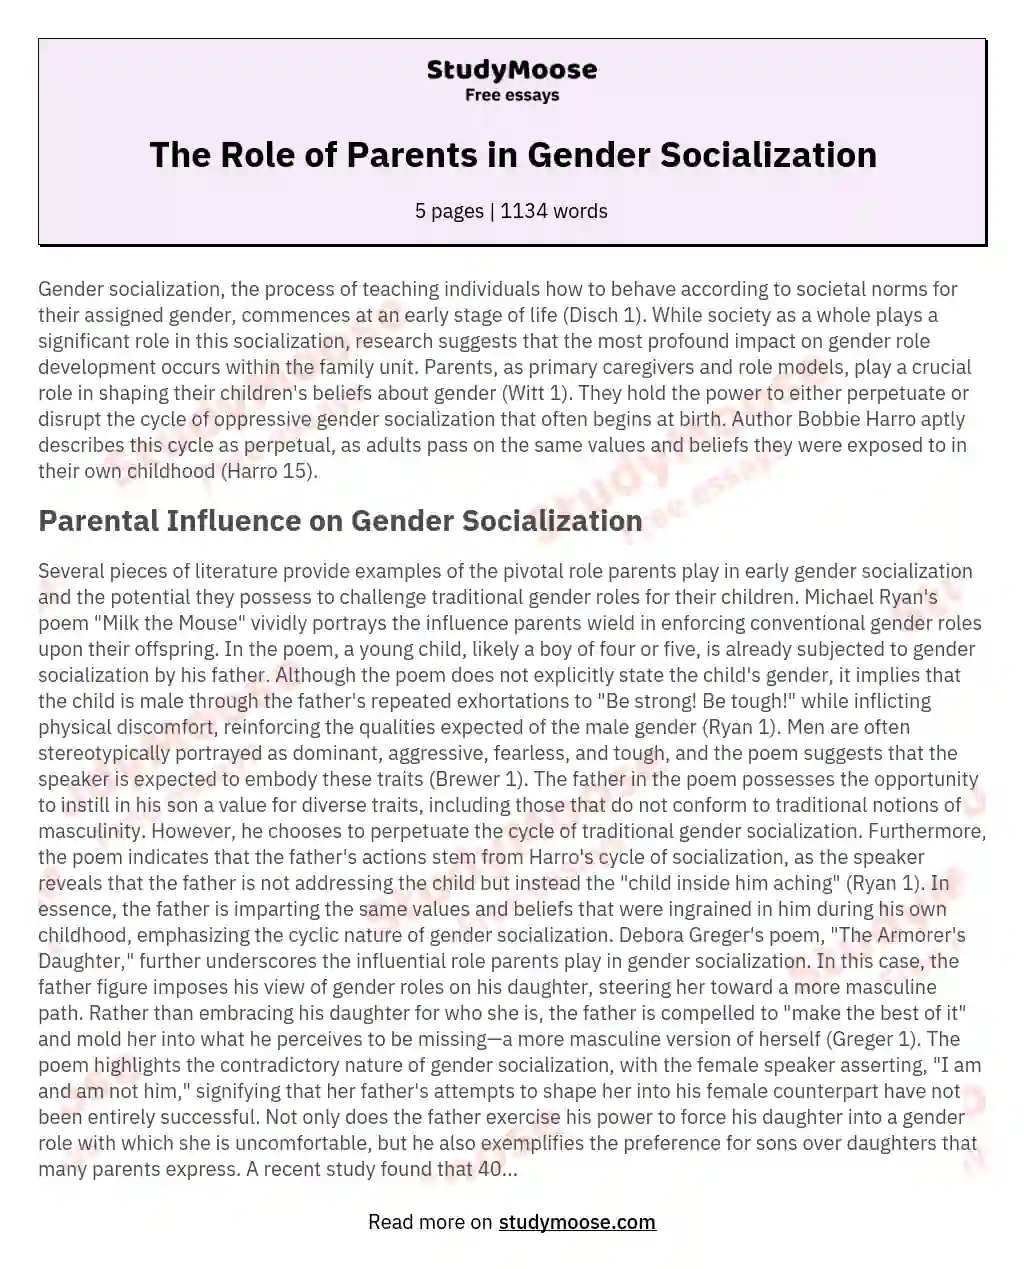 The Role of Parents in Gender Socialization